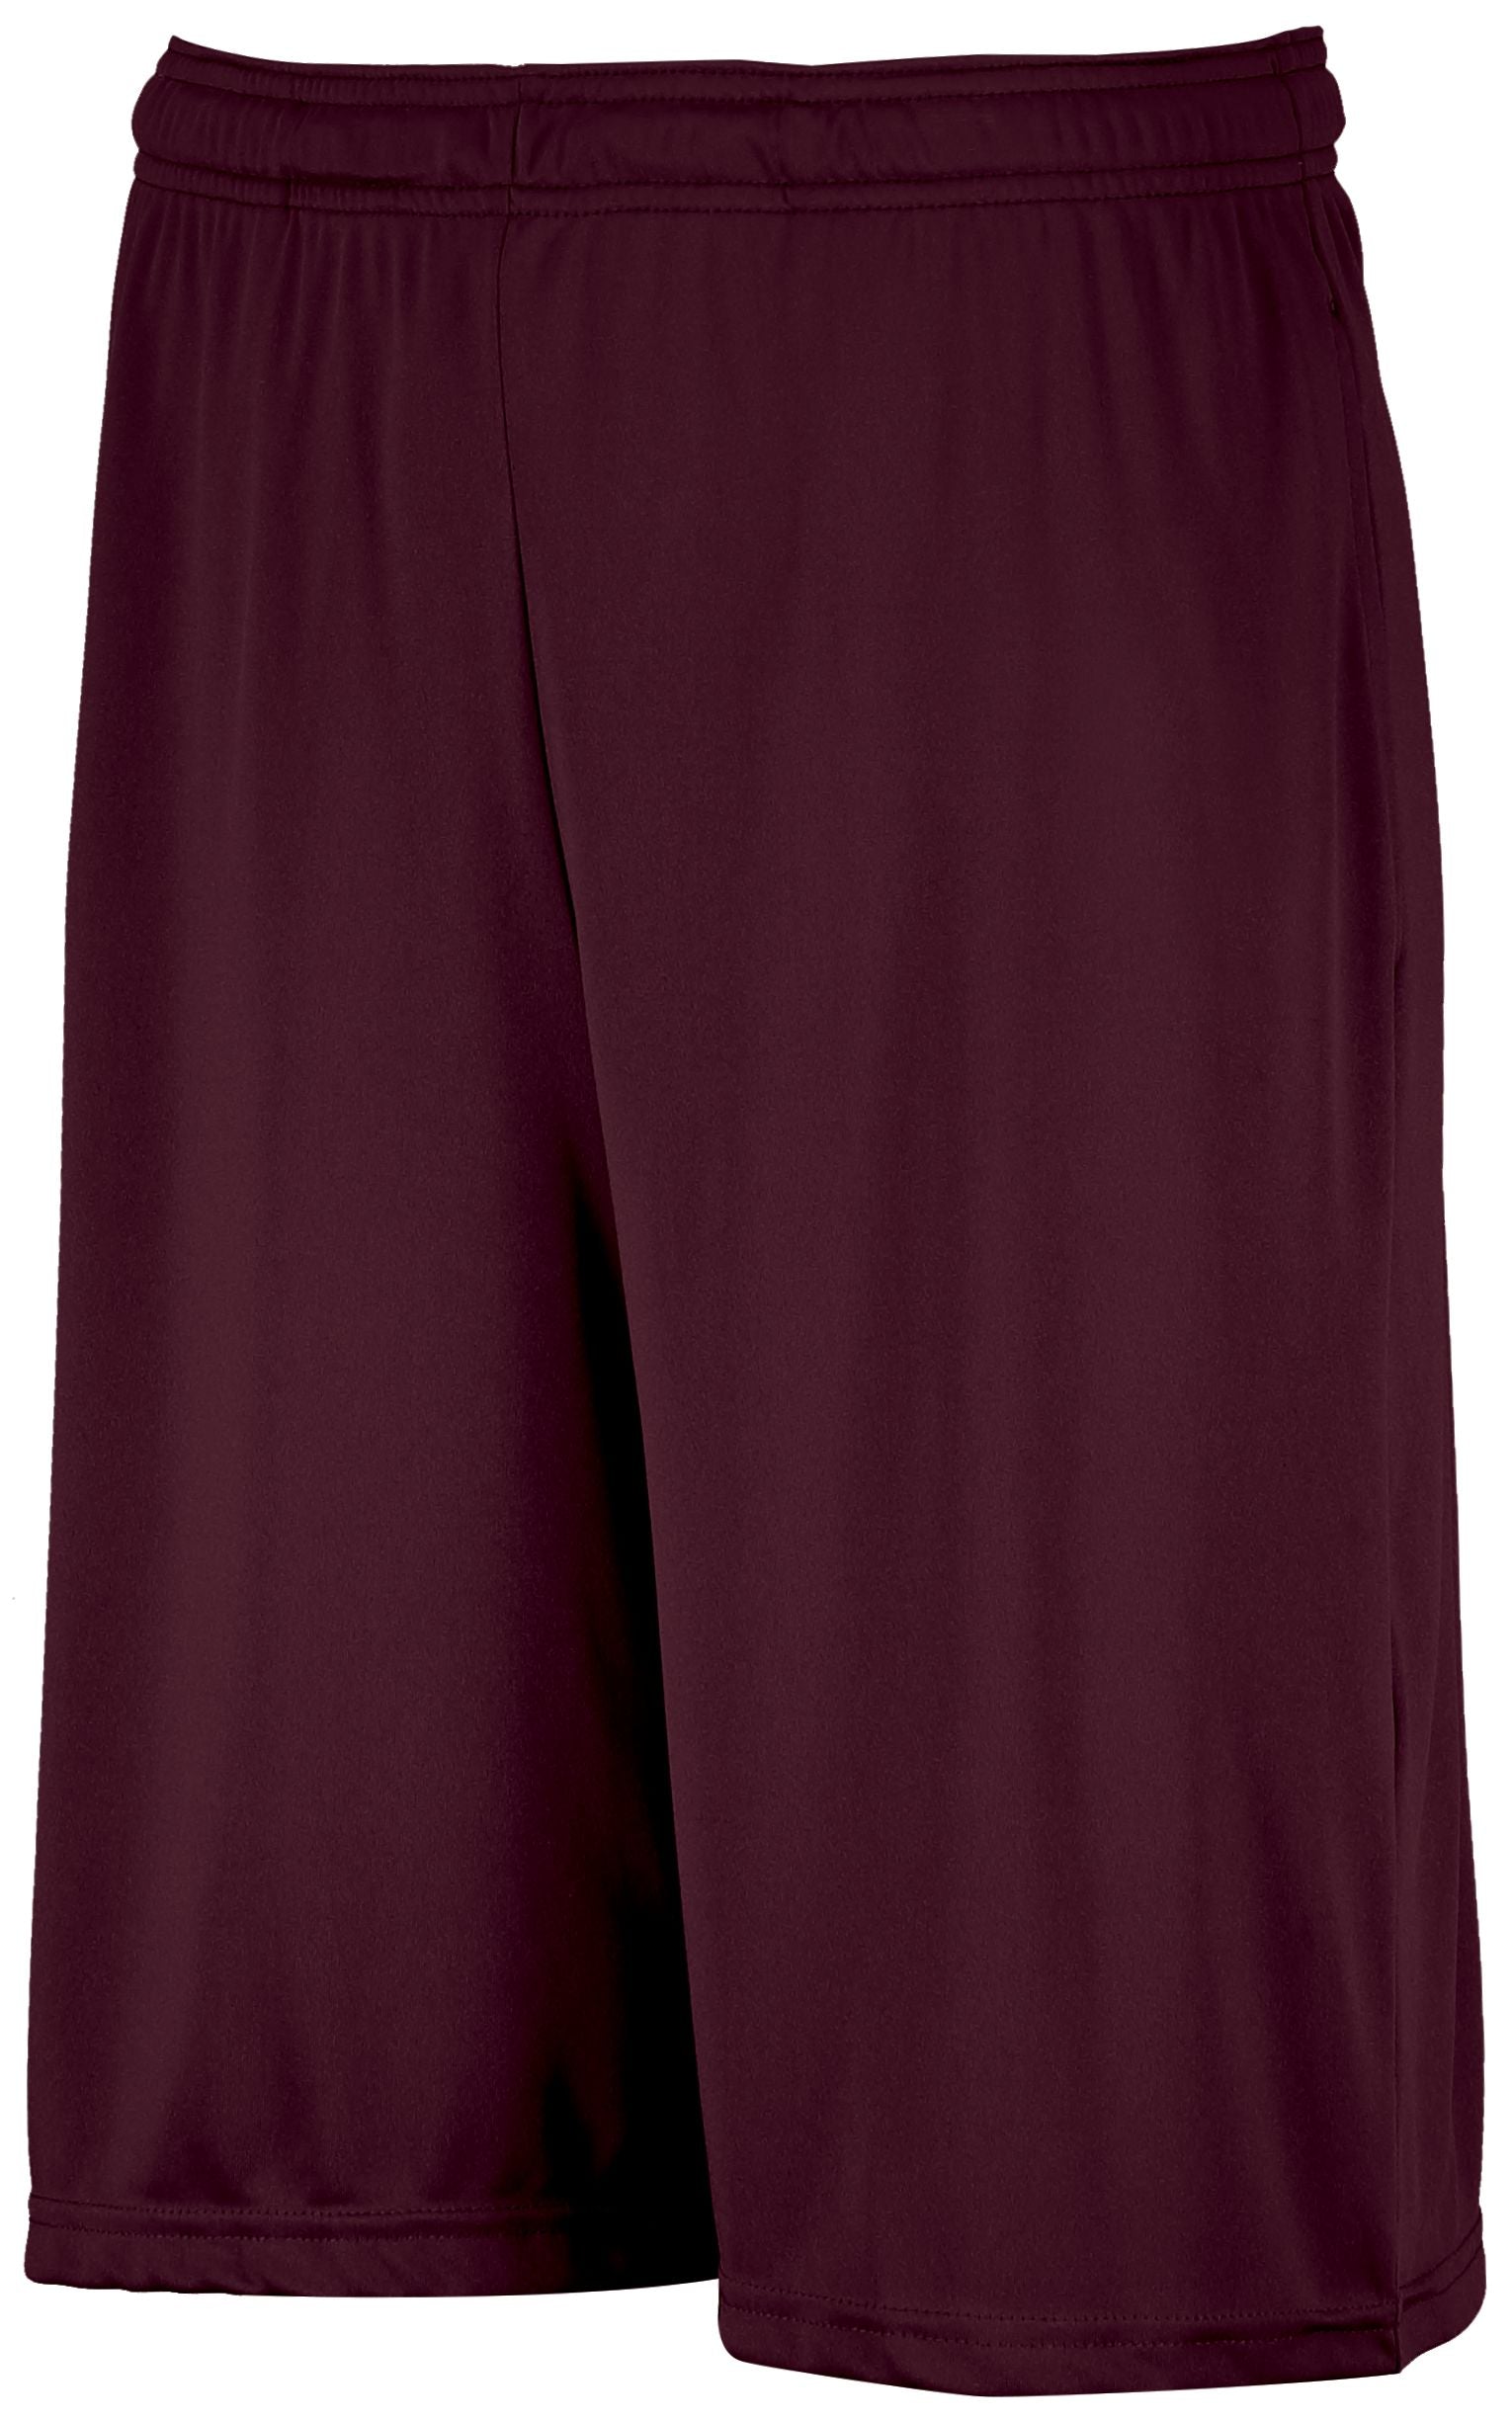 Russell Athletic Dri-Power Essential Performance Shorts With Pockets in Maroon  -Part of the Adult, Adult-Shorts, Russell-Athletic-Products product lines at KanaleyCreations.com